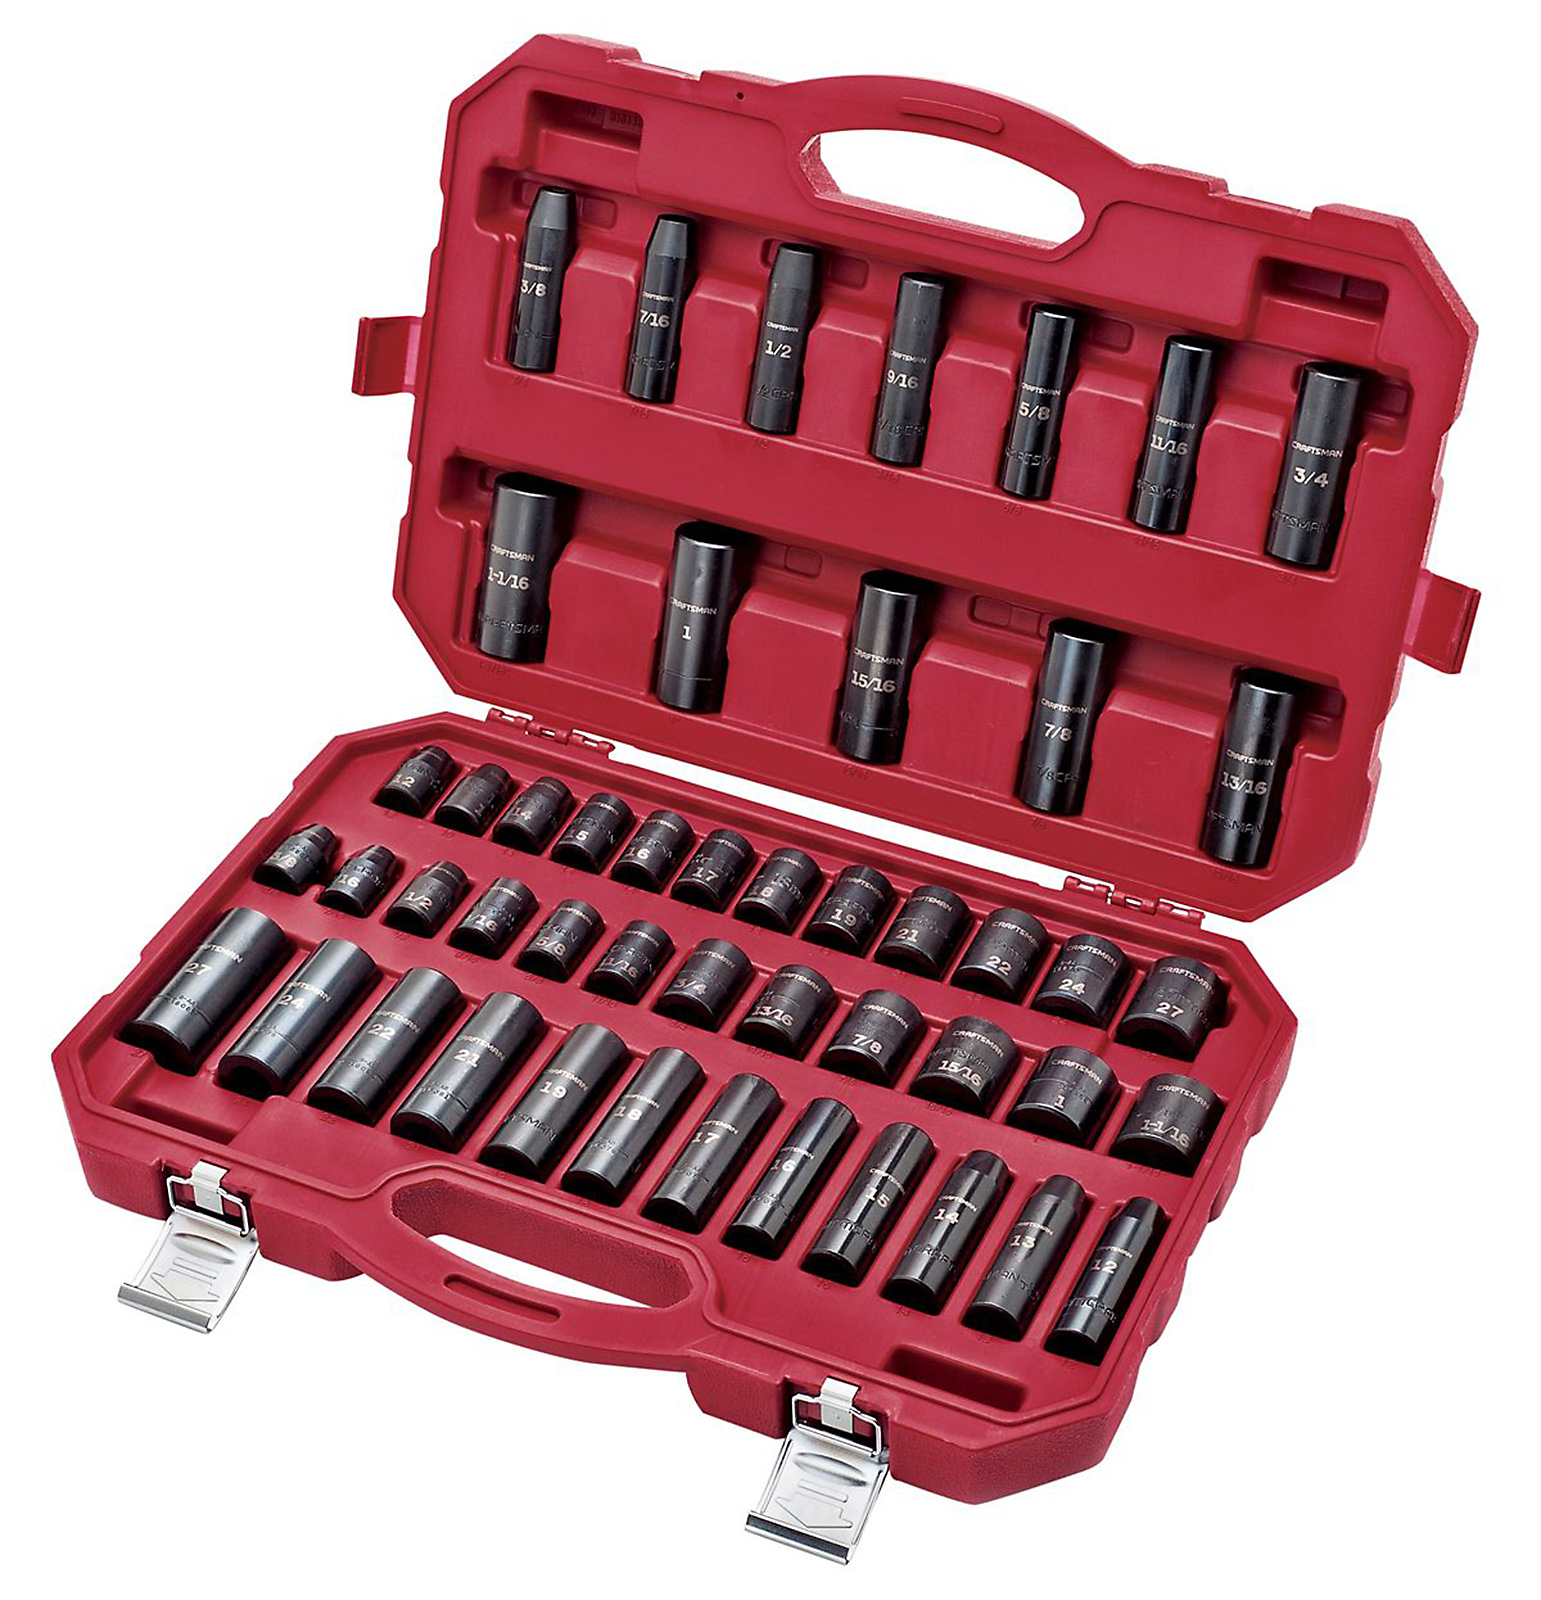 0099575165481 - 48PC MASTER LASER IMPACT SOCKET ACCESSORY SET WITH PORTABLE CASE, 1/2 DRIVE, INCH/METRIC